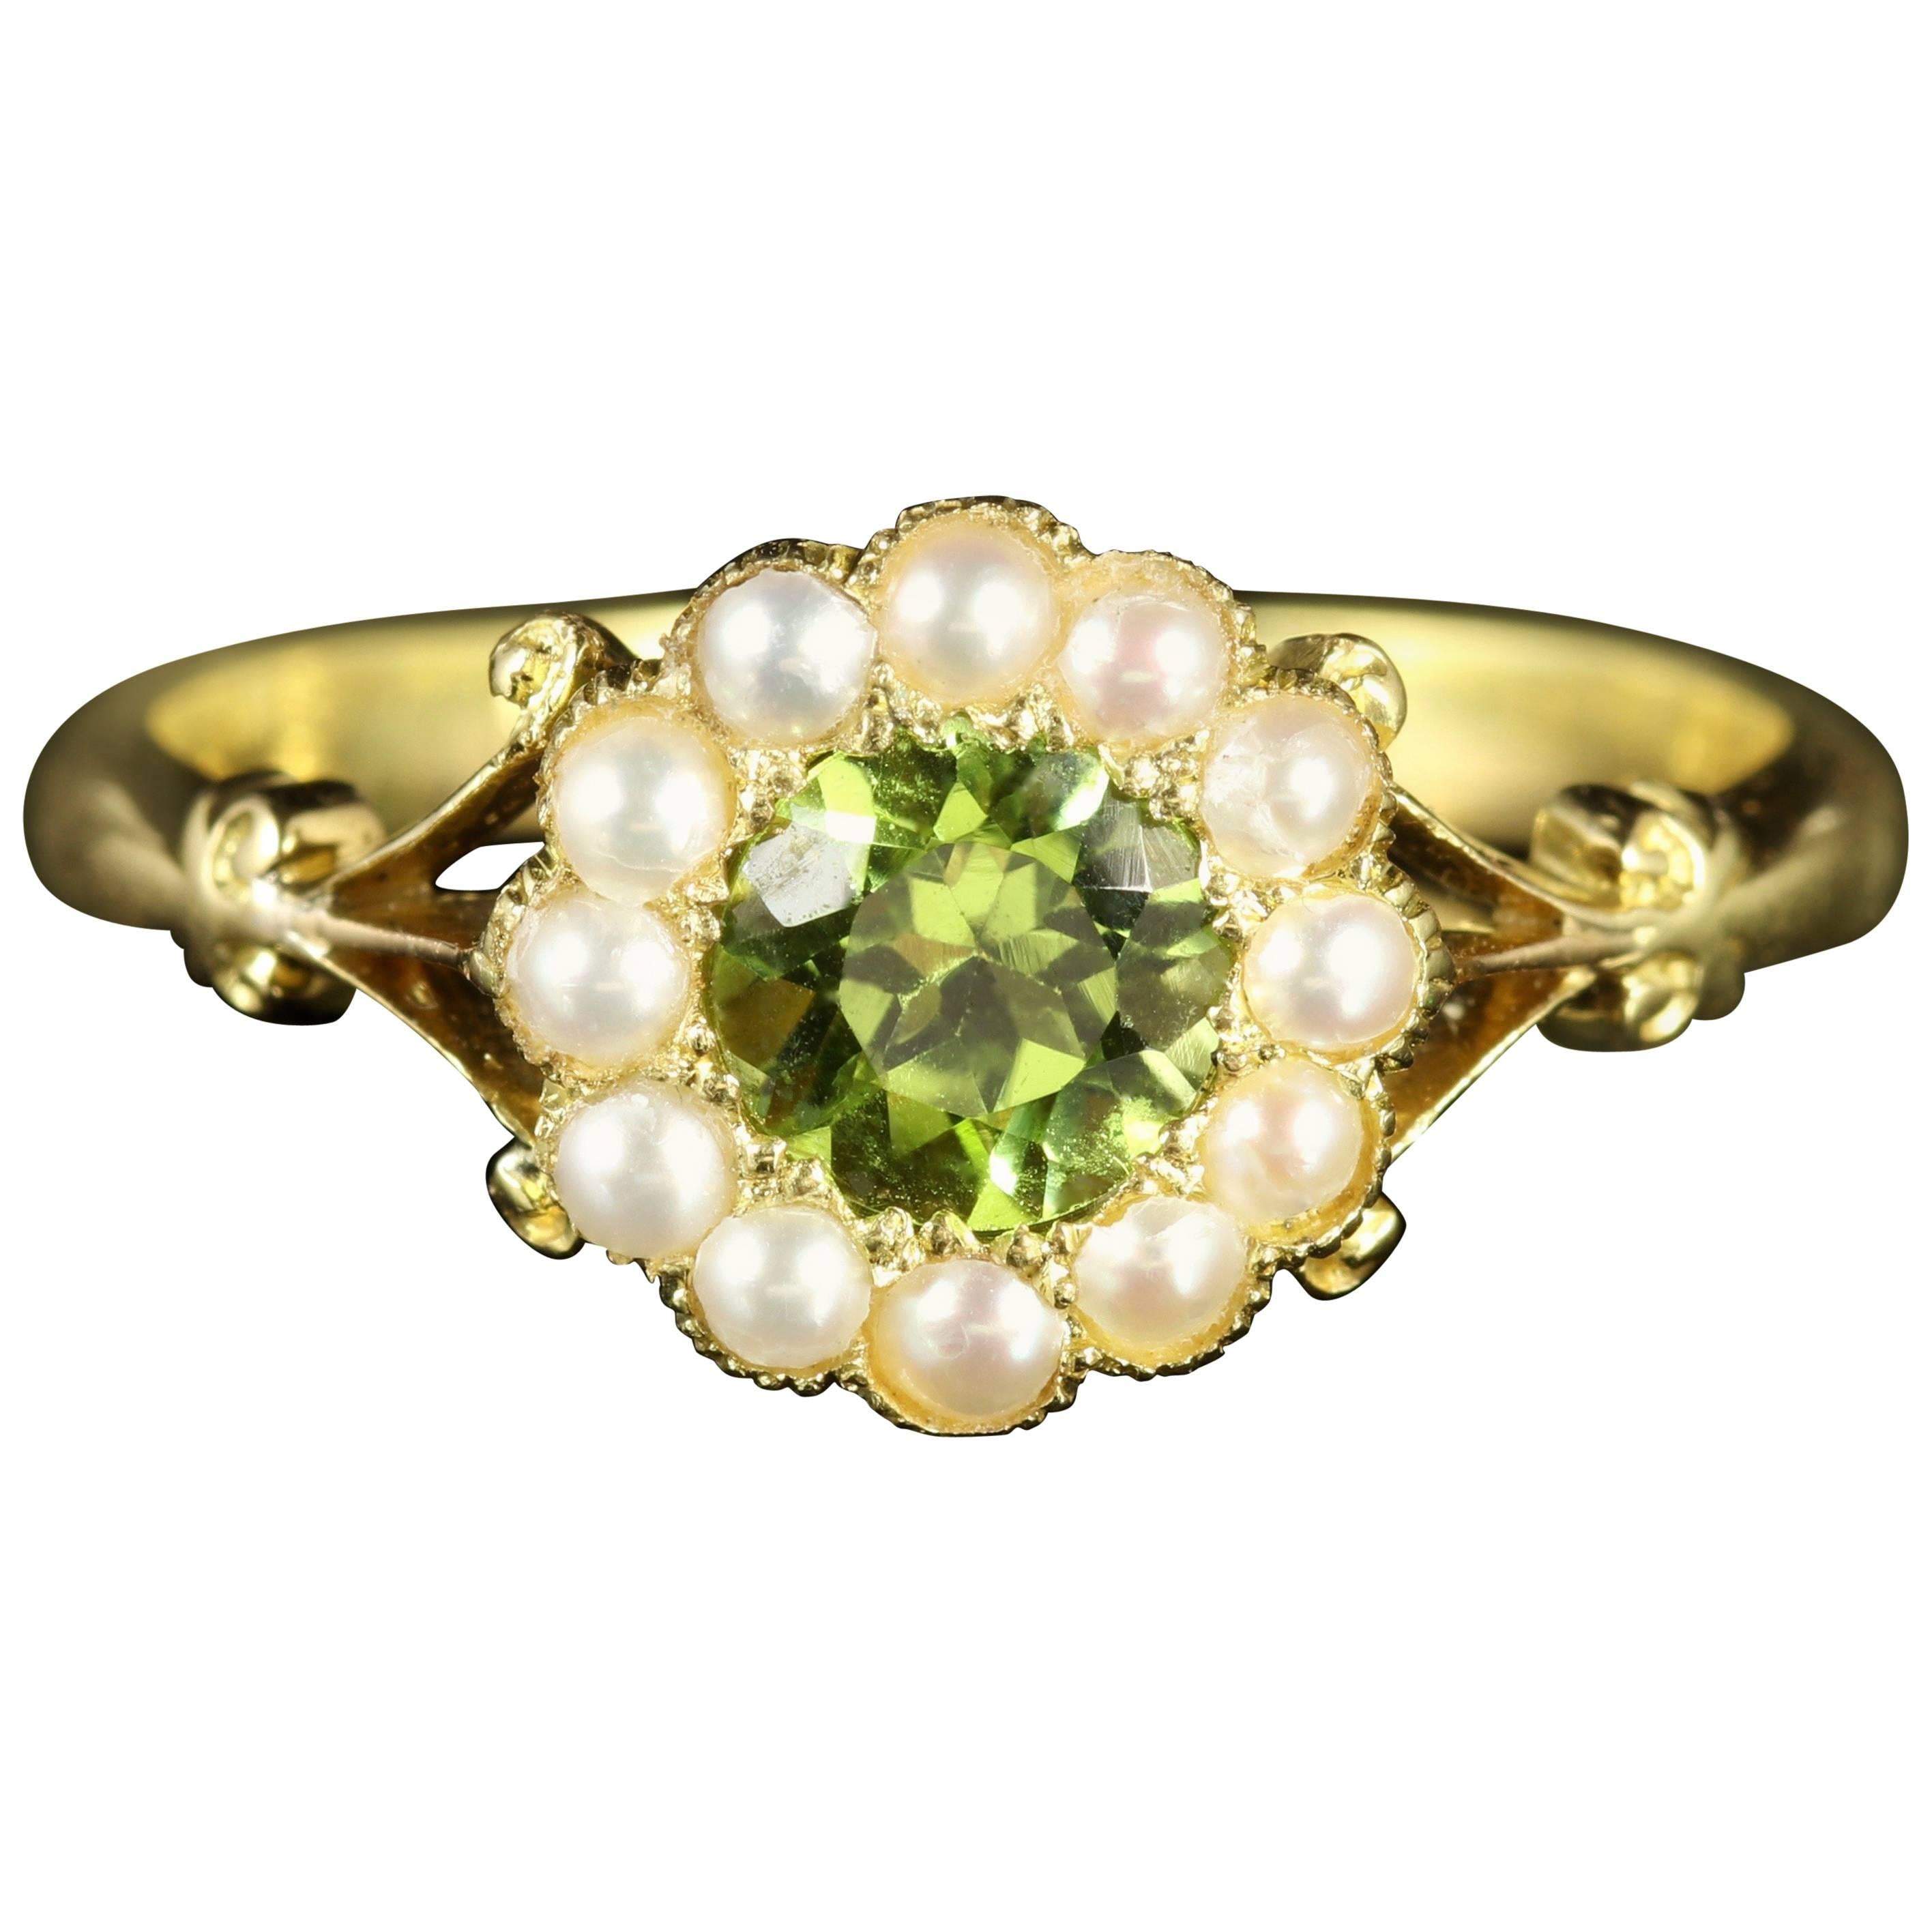 Antique Victorian Peridot and Pearl Ring 18 Carat Gold